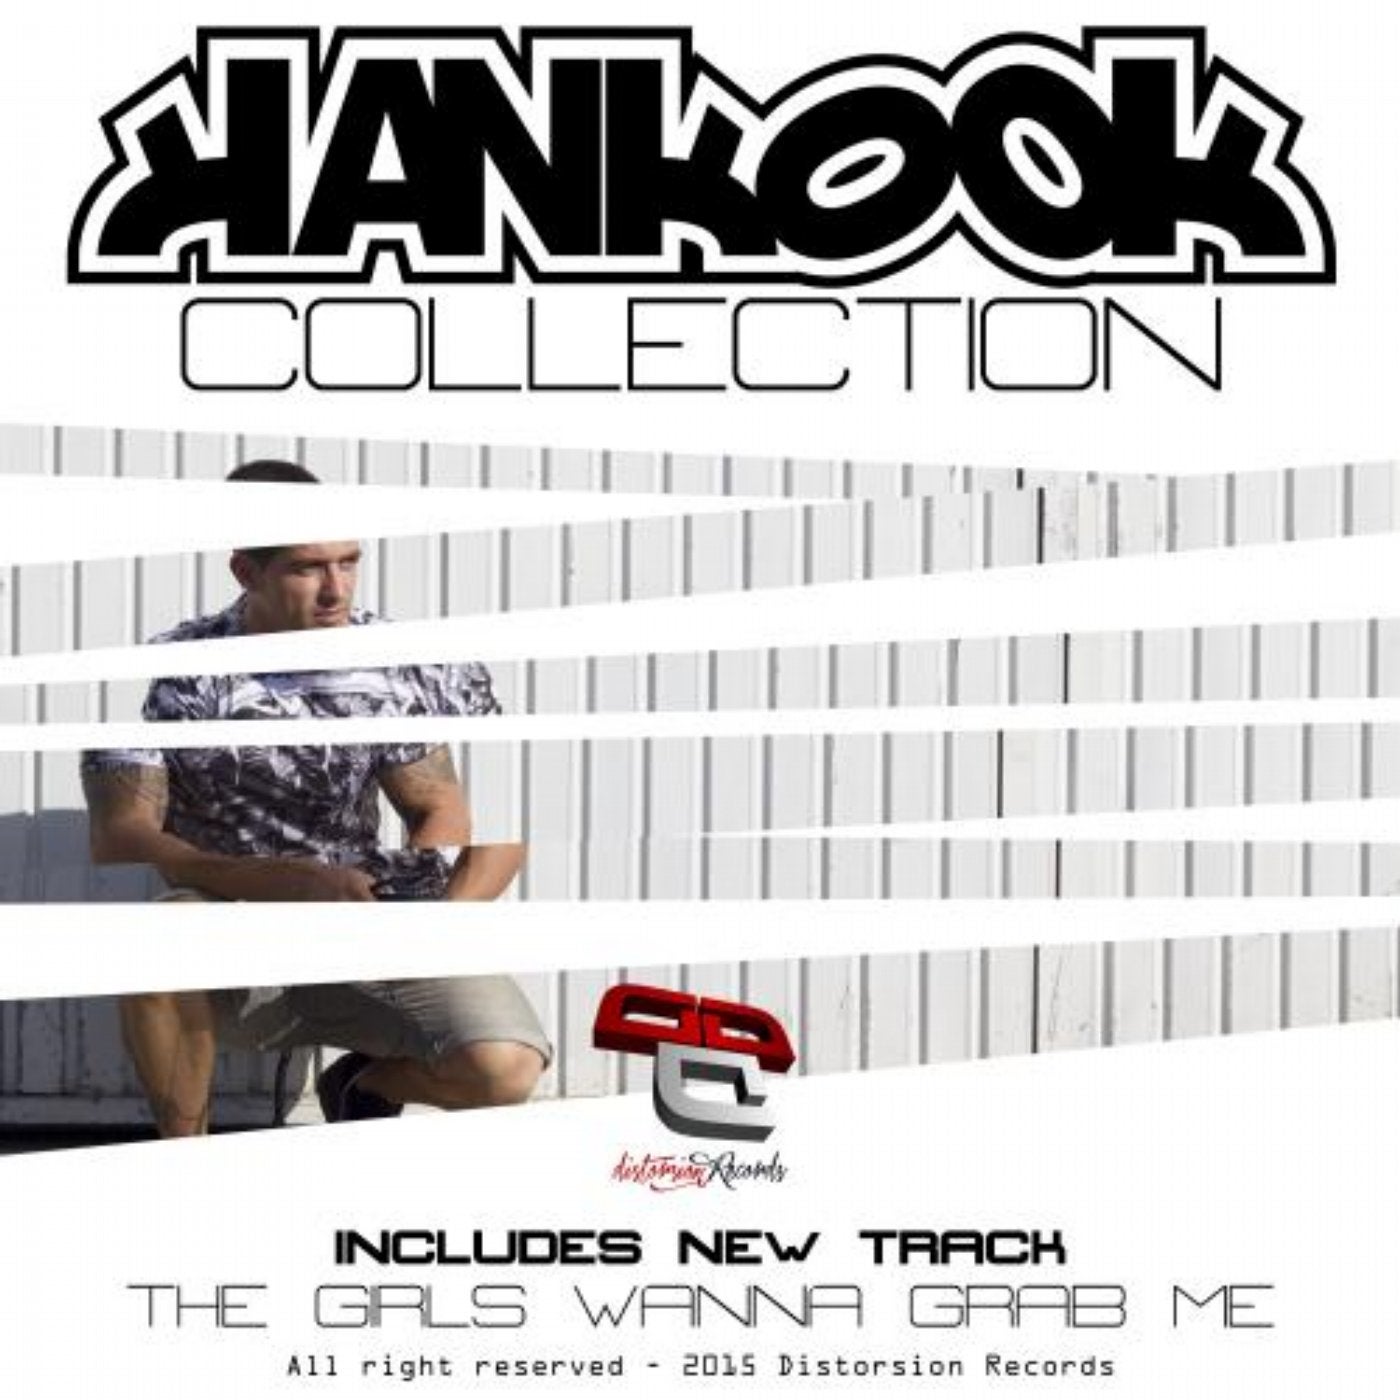 Hankook Collection